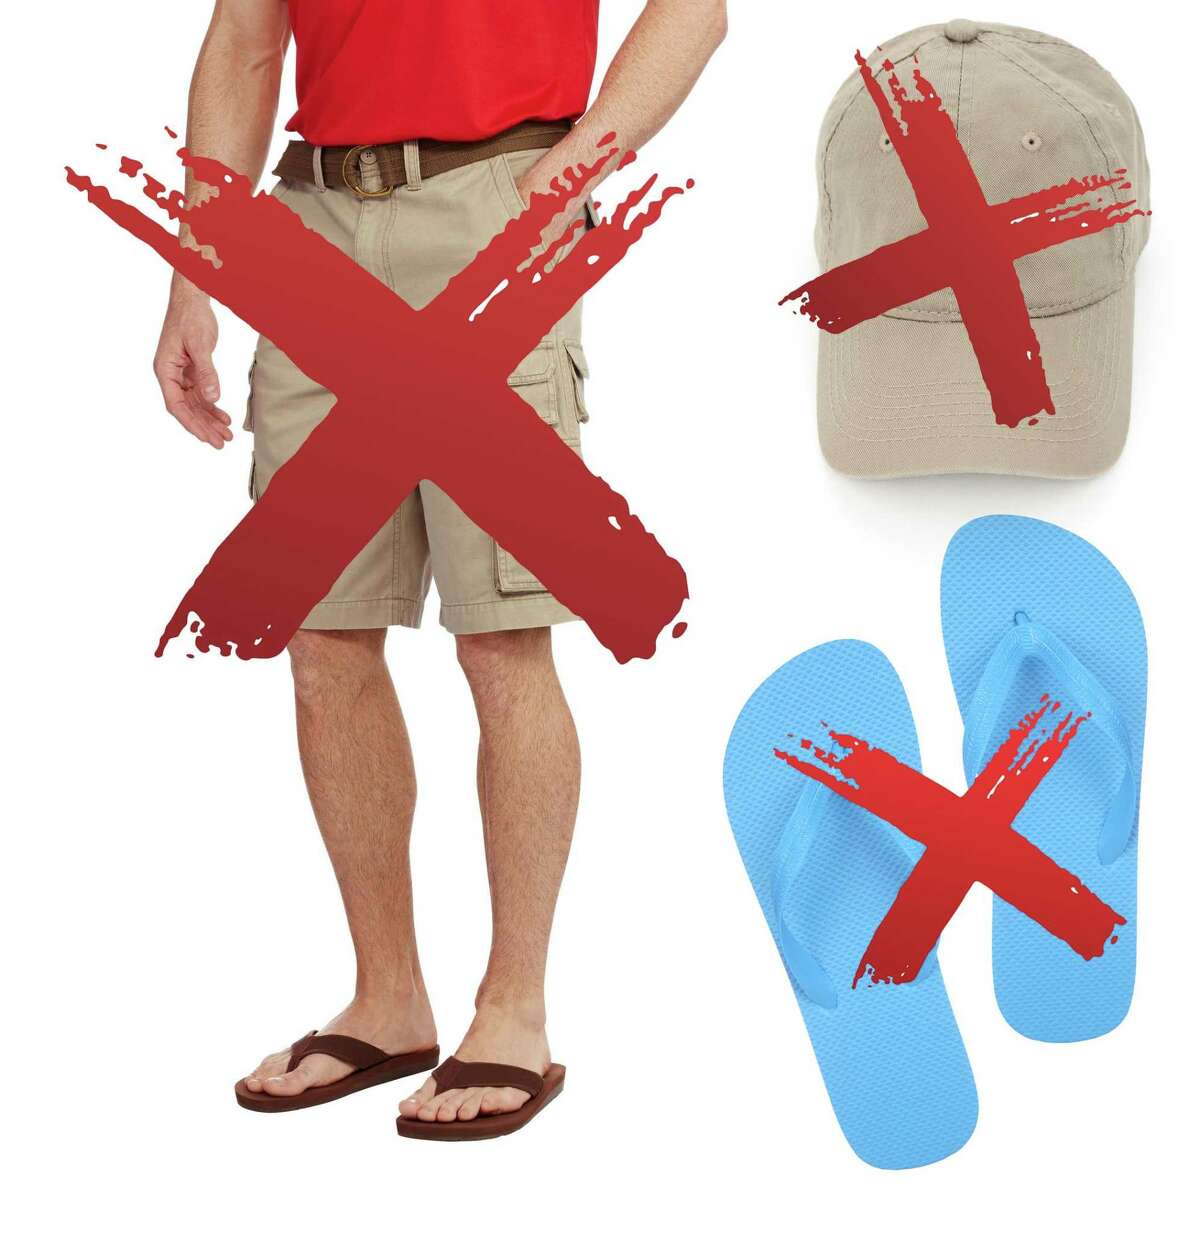 Cargo shorts, backward baseball caps and flipflops have been the lazy man’s go-to attire for too many years.